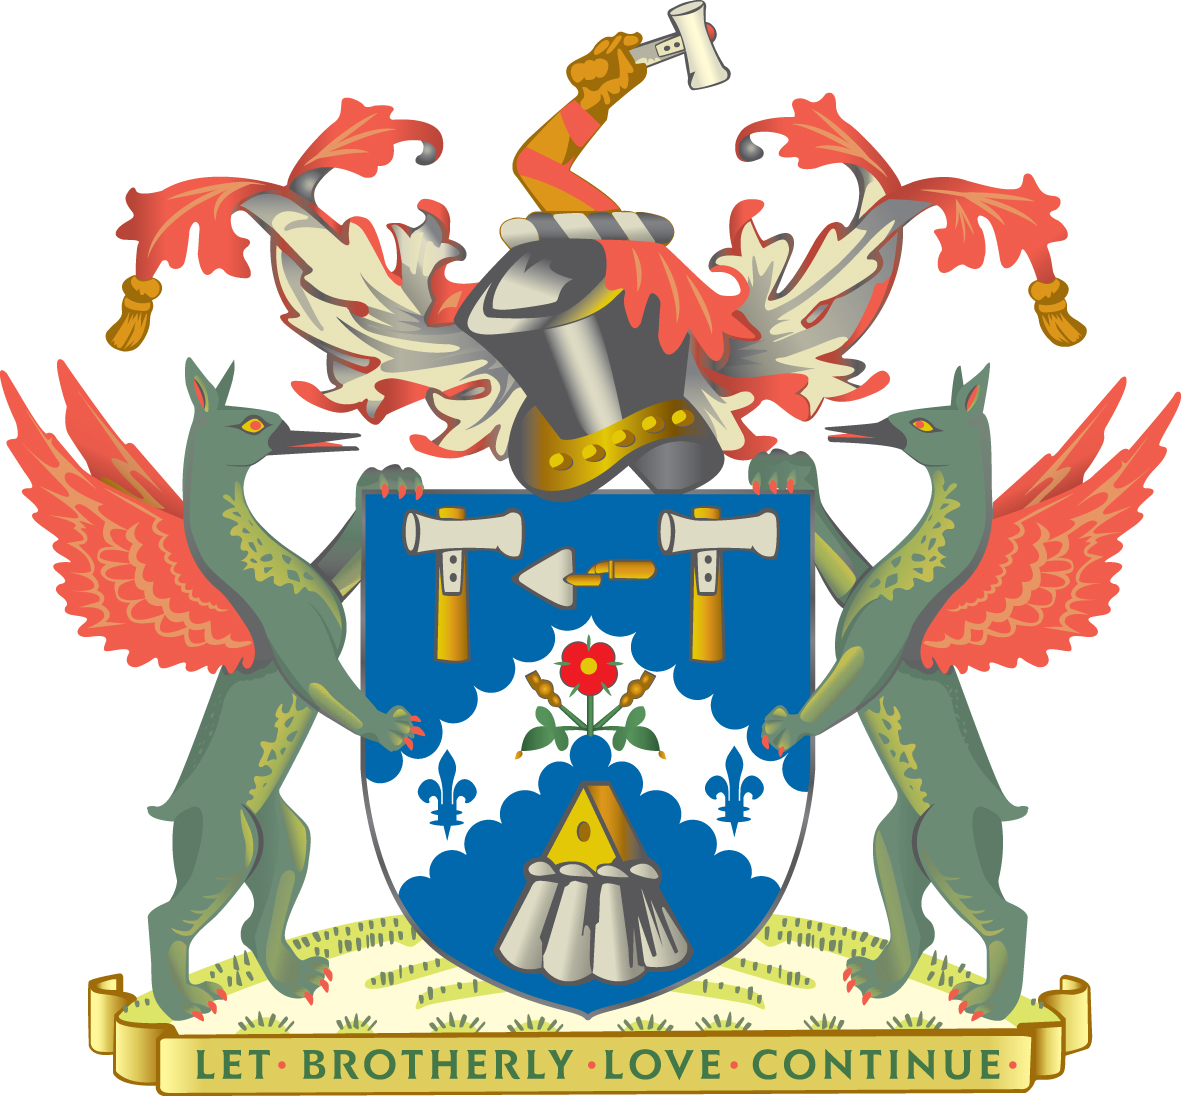 logo for The Worshipful Company of Plaisterers. Motto reads: Let brotherly love continue